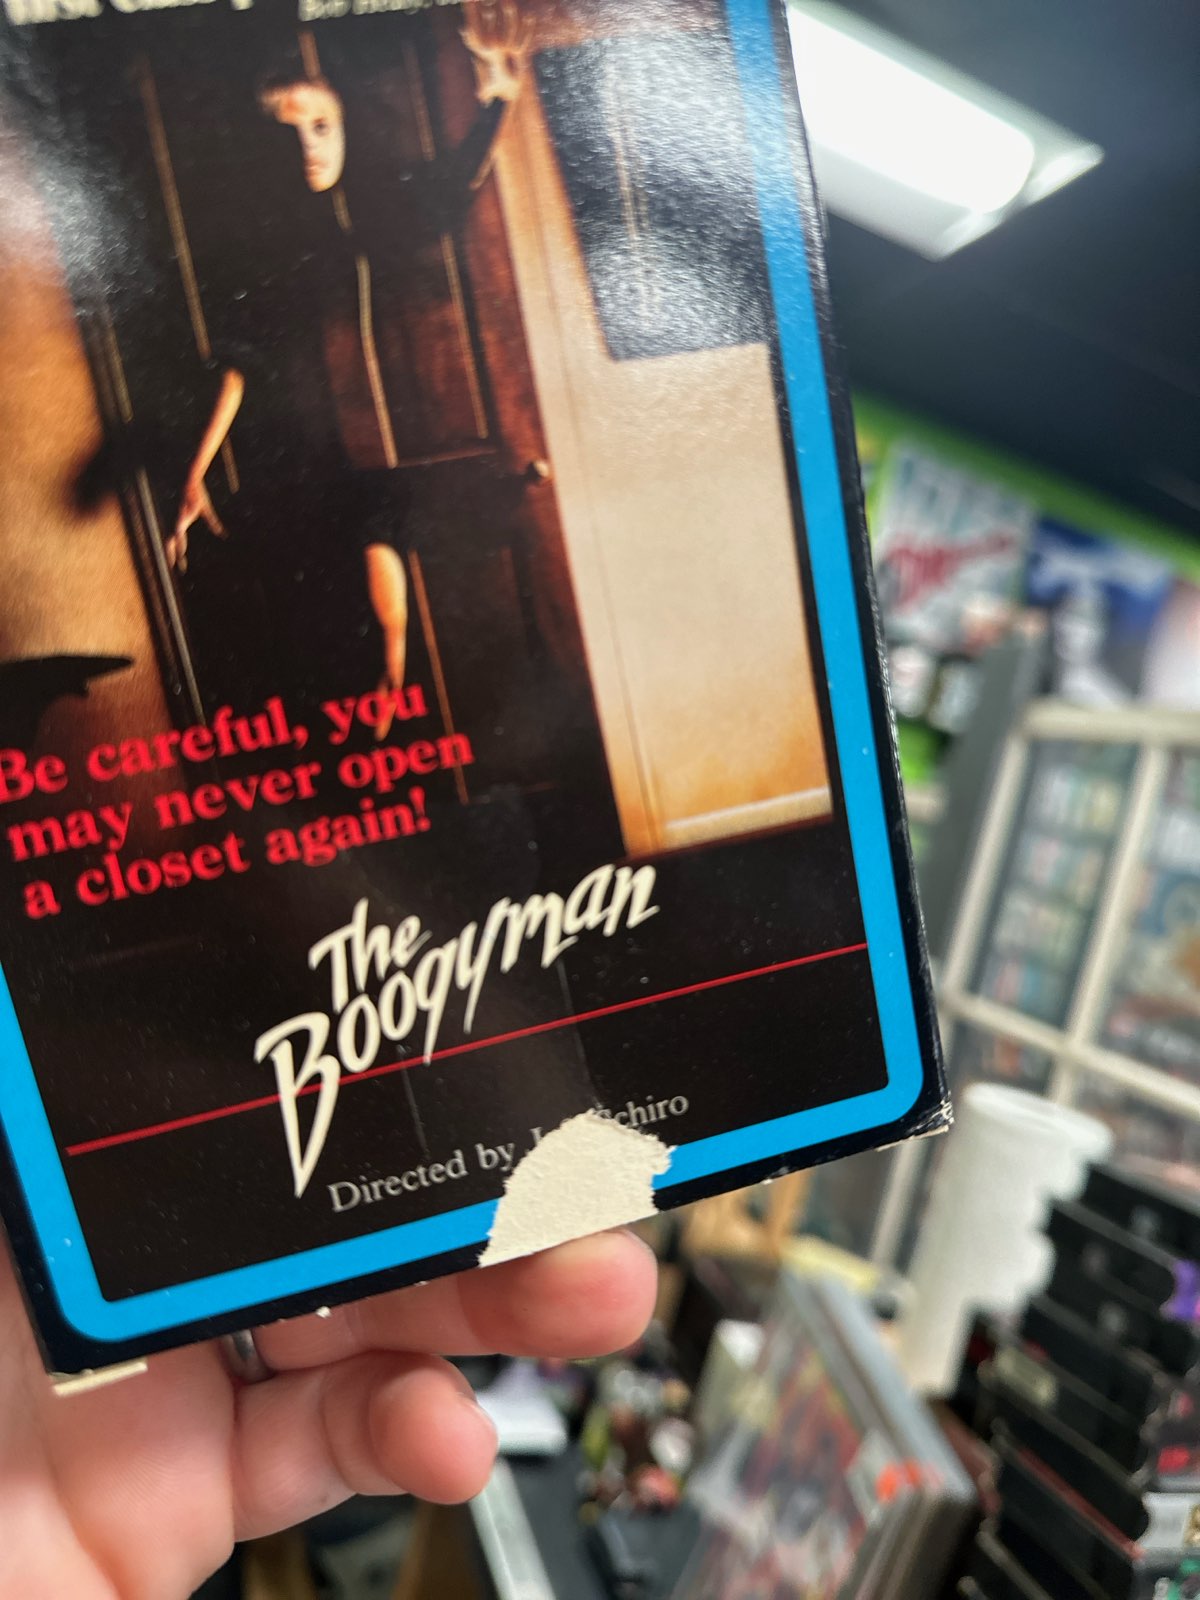 Stephen King's Nightshift Collection Vol. 2: The Boogyman (Some Box Damage, See Photos)